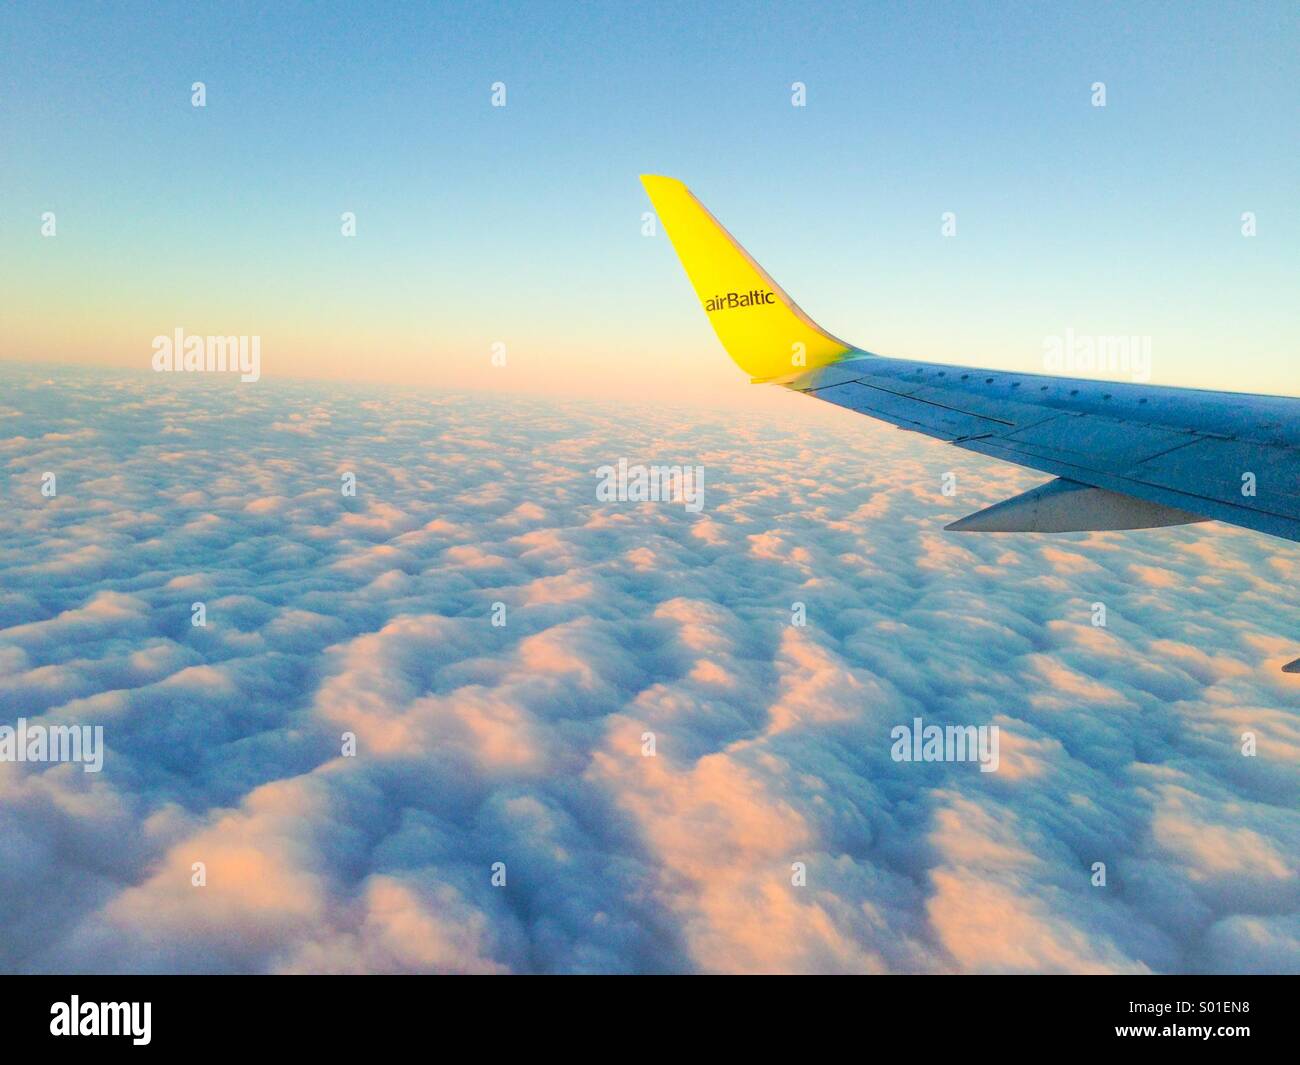 Airbaltic airplane up above the clouds Stock Photo